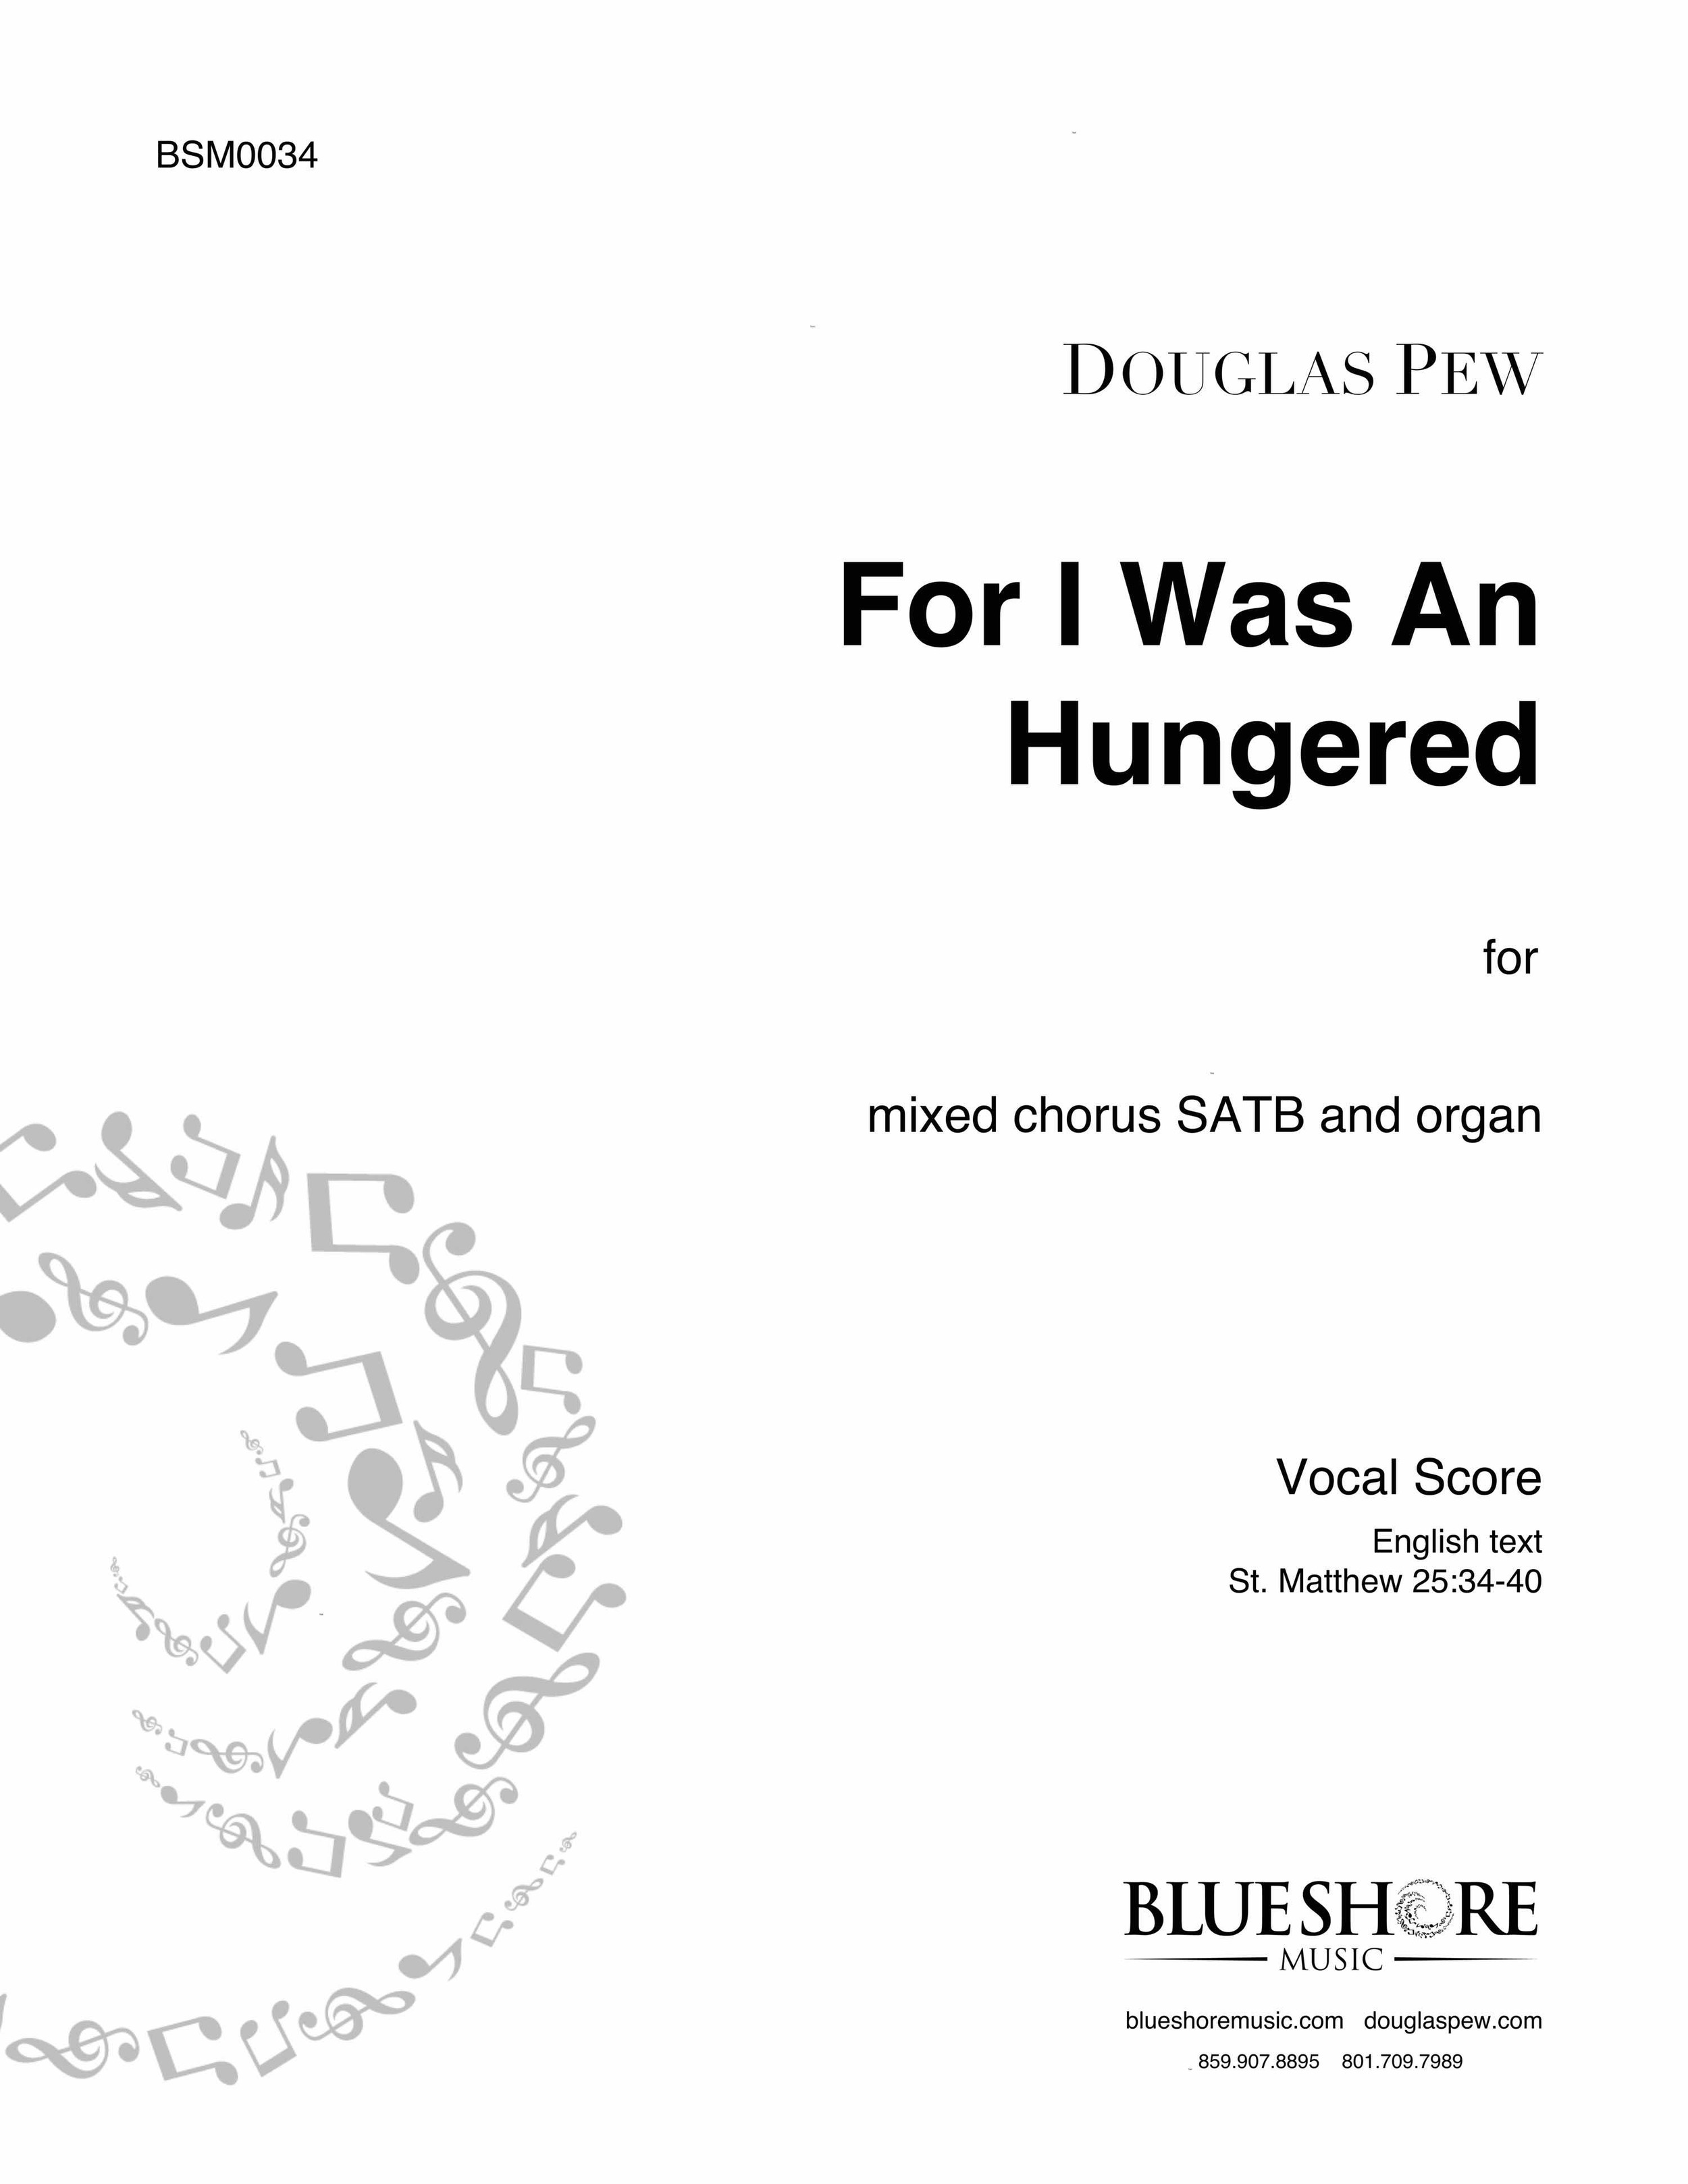 Pew_BSM0034_ForIWasAnHungered_cover_smaller.jpg